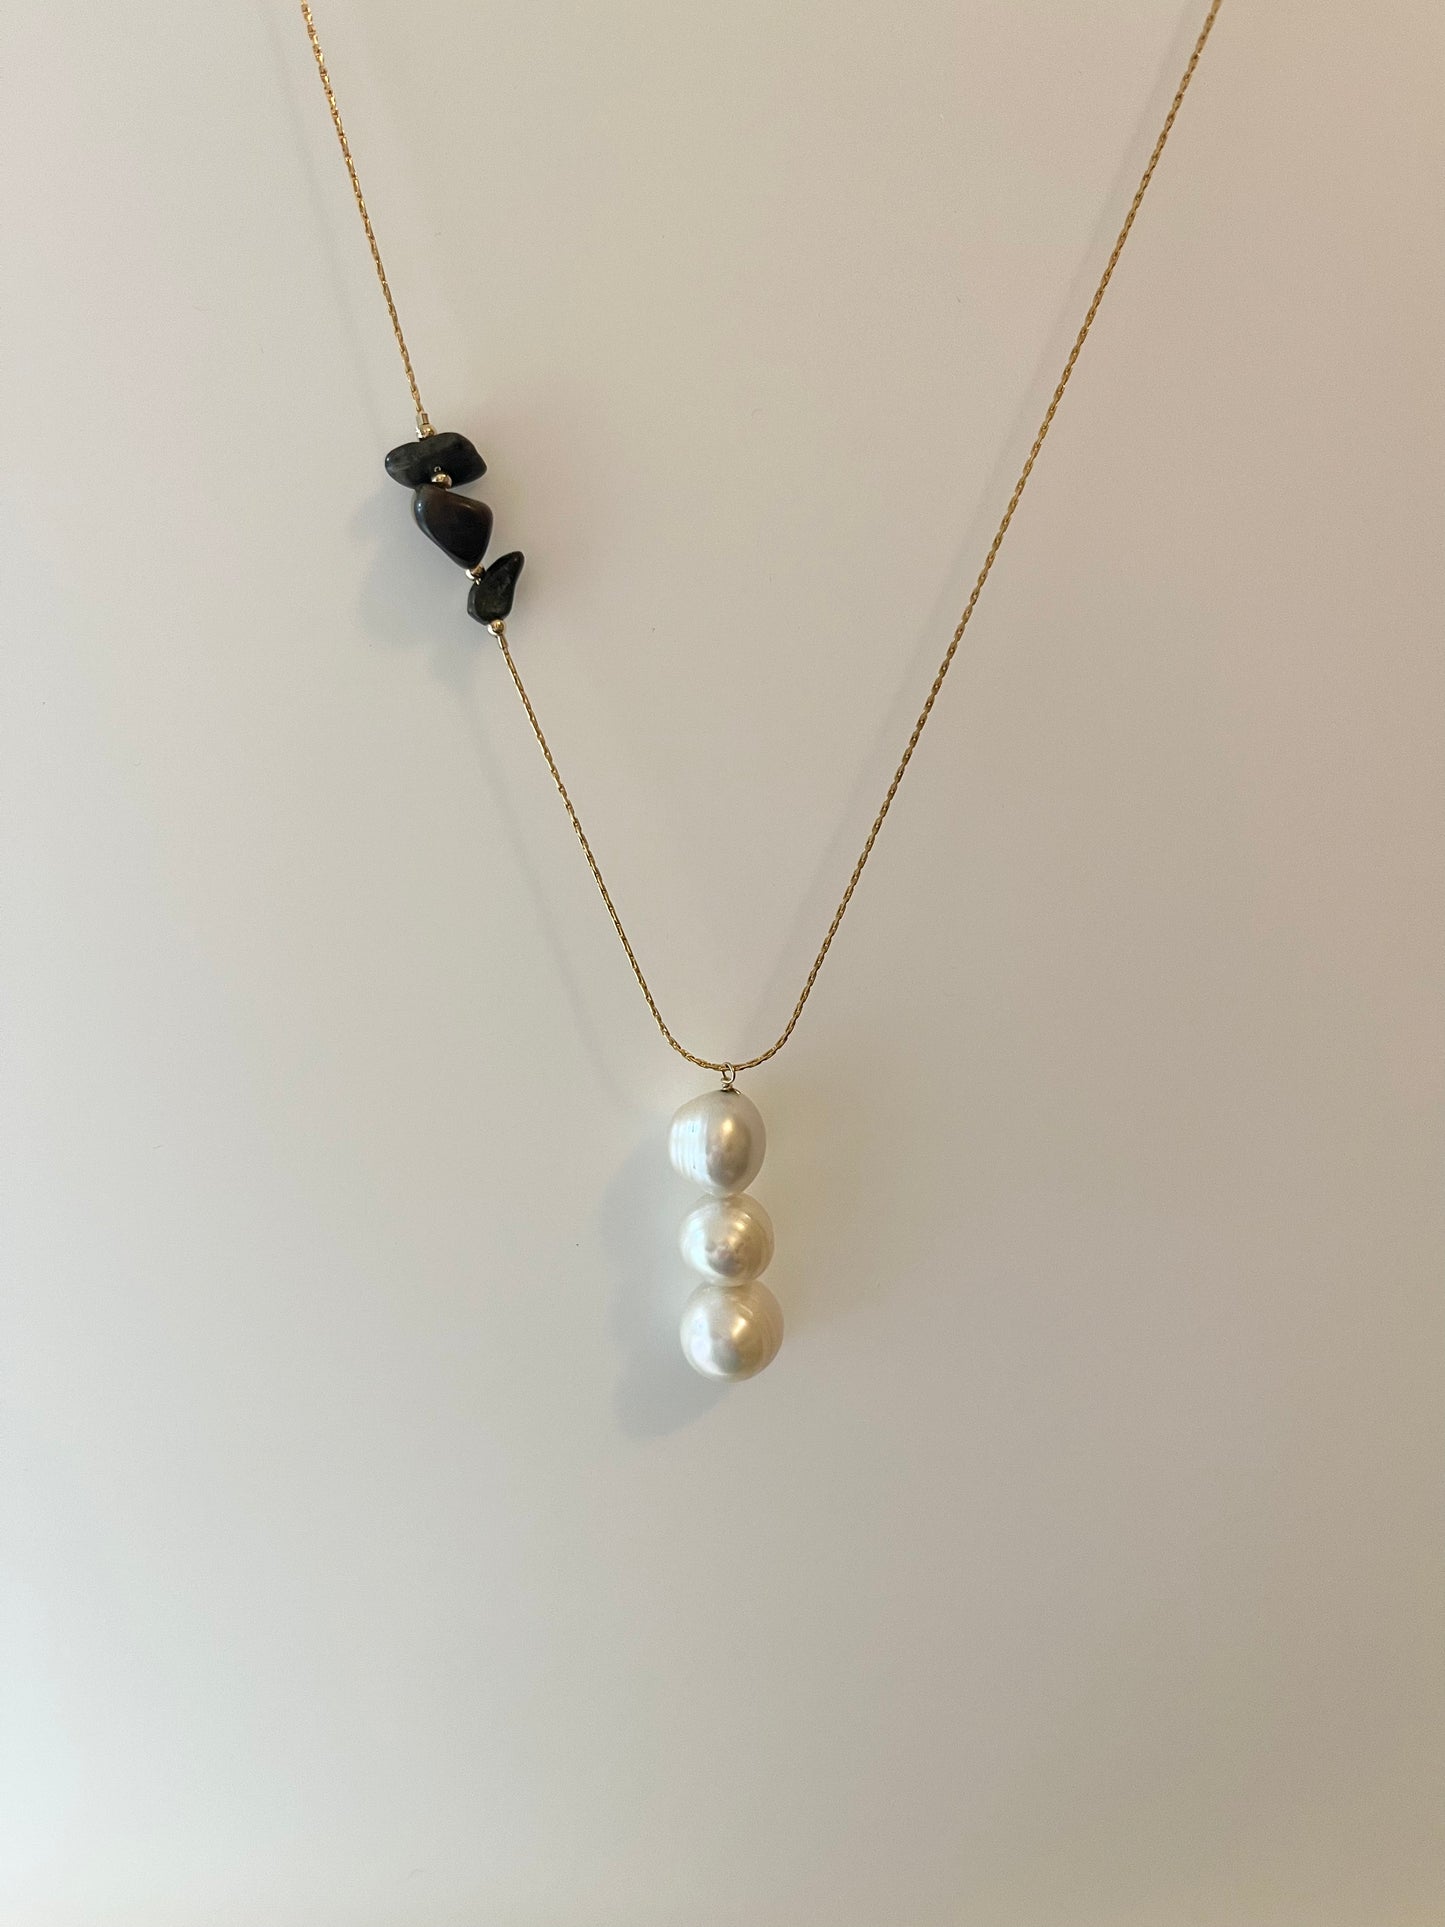 Water and Stone Necklace